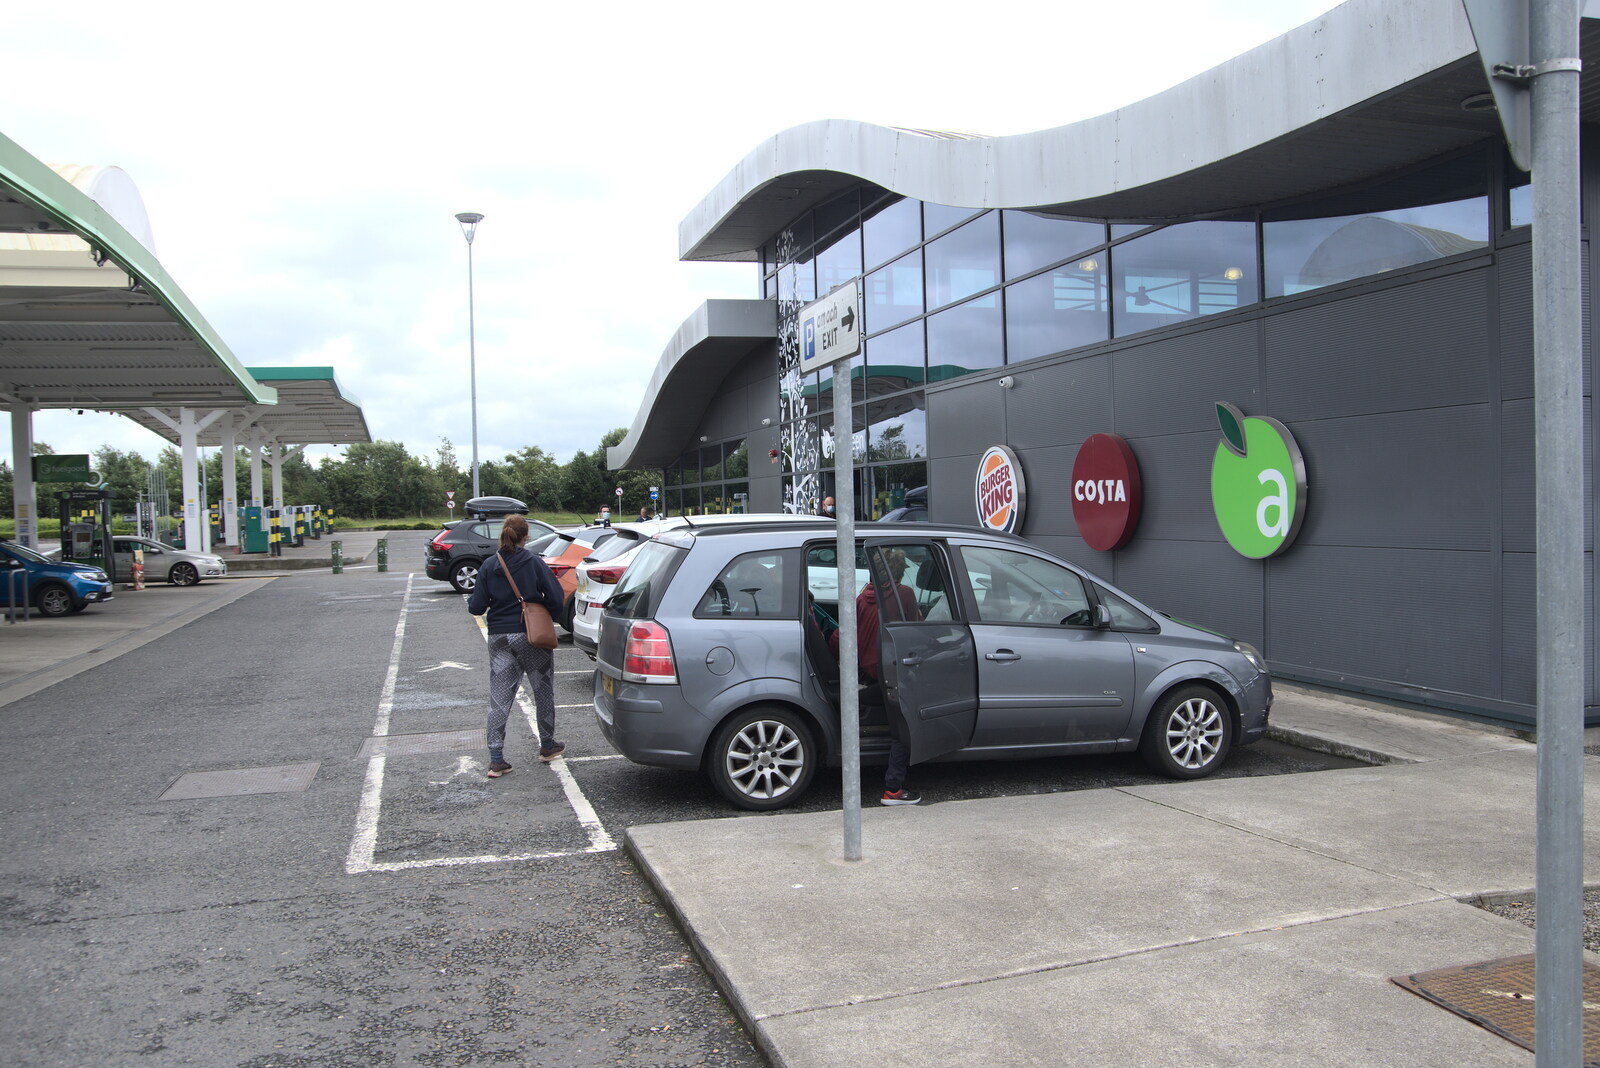 Pints of Guinness and Streedagh Beach, Grange and Sligo, Ireland - 9th August 2021: Isobel heads into Applegreen services on the M4